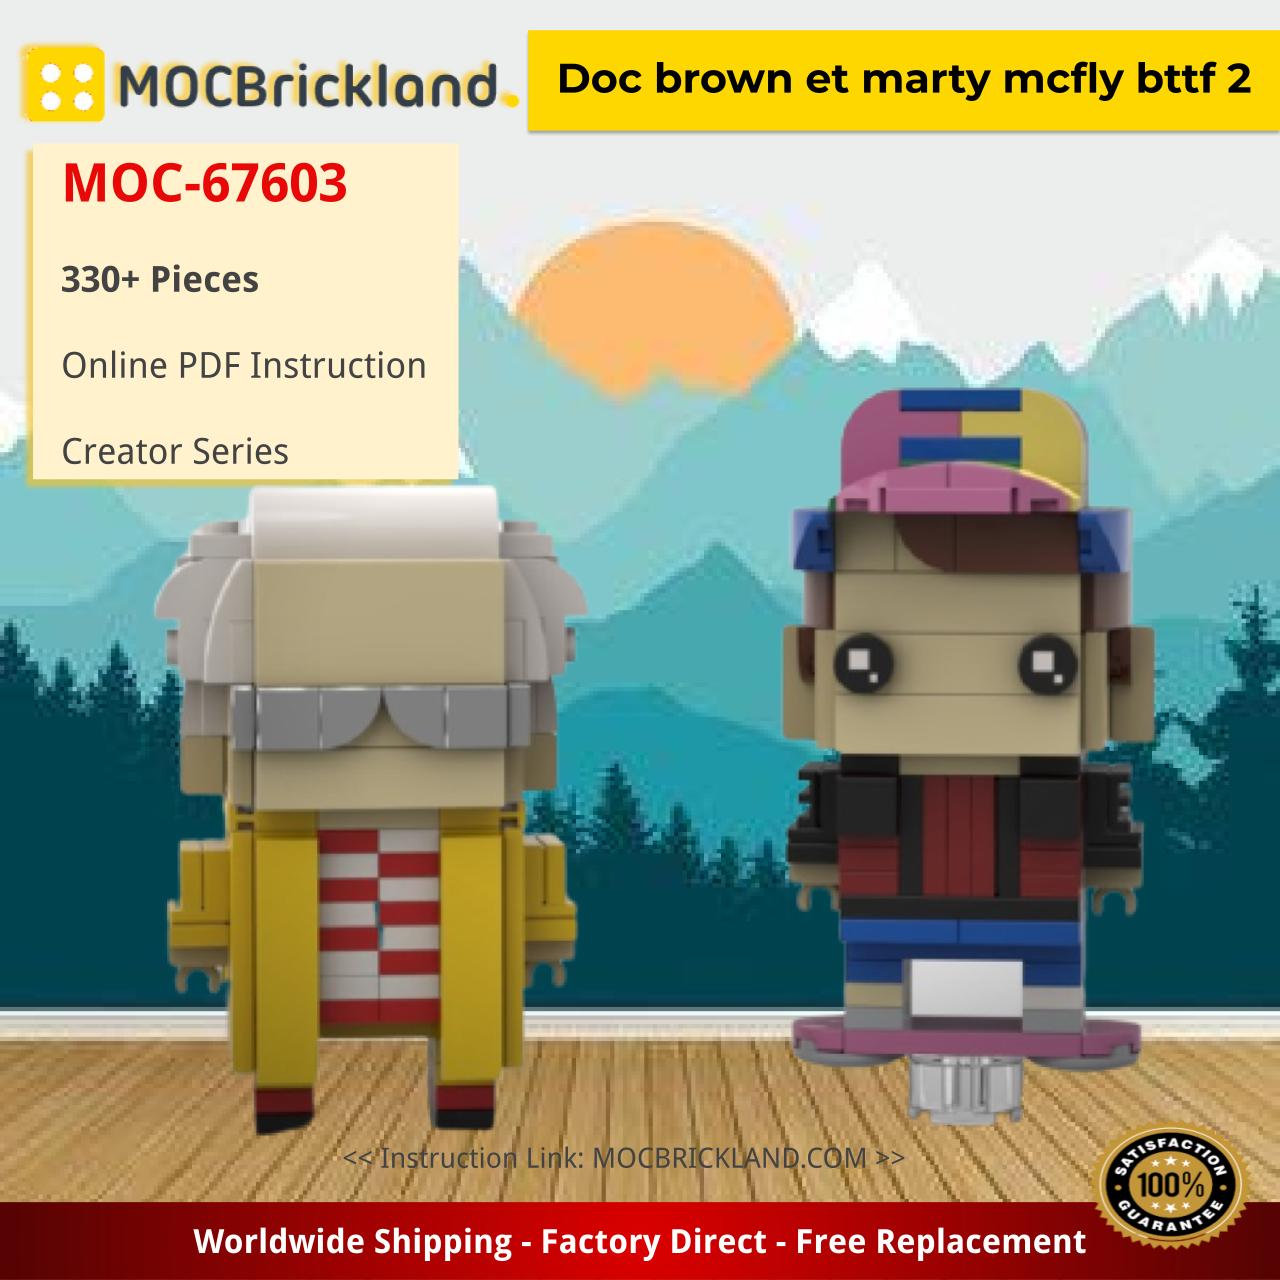 Doc brown et marty mcfly bttf 2 MOC-67603 by Headsbrick with 330 Pieces